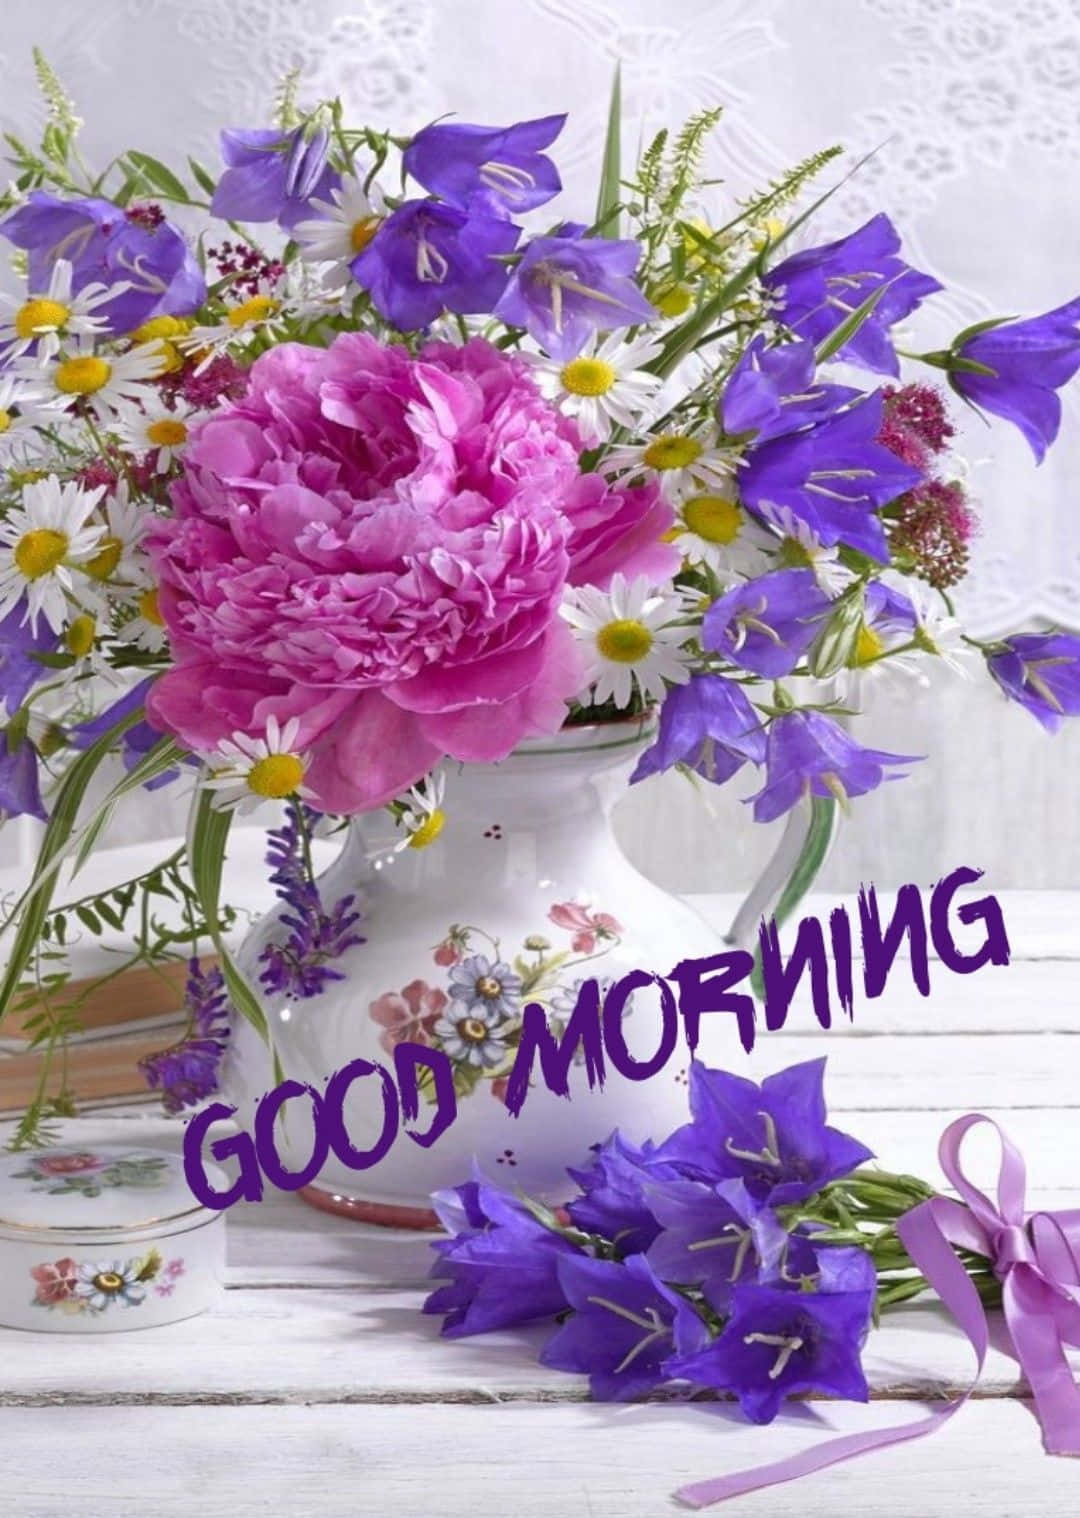 Download Good Morning Violet Purple Flower Picture | Wallpapers.com